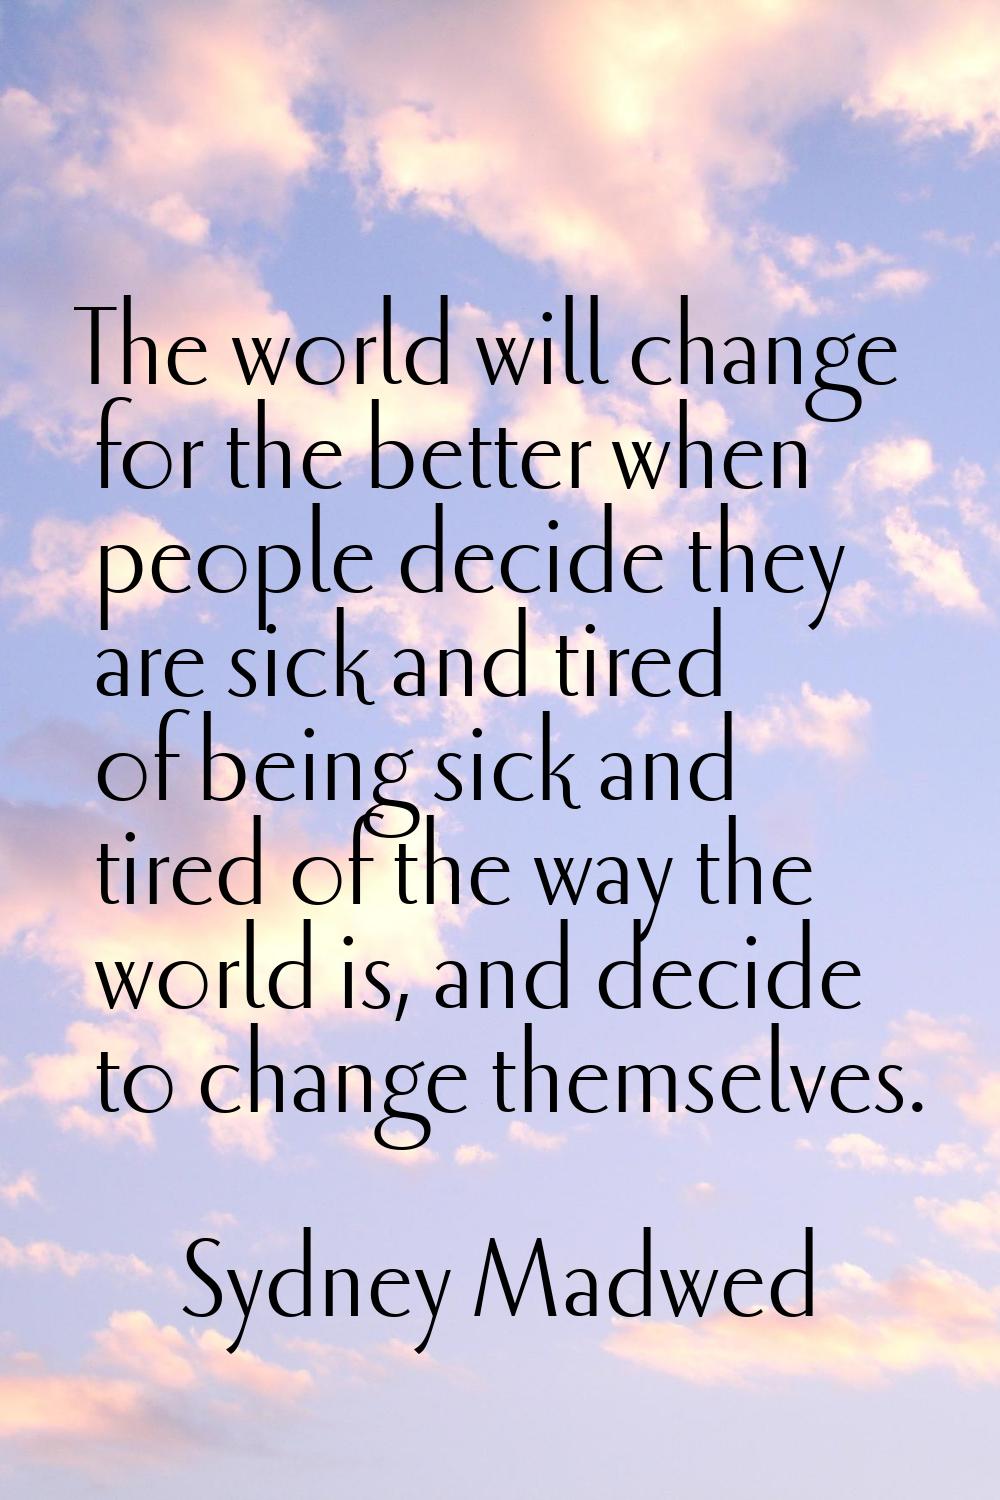 The world will change for the better when people decide they are sick and tired of being sick and t